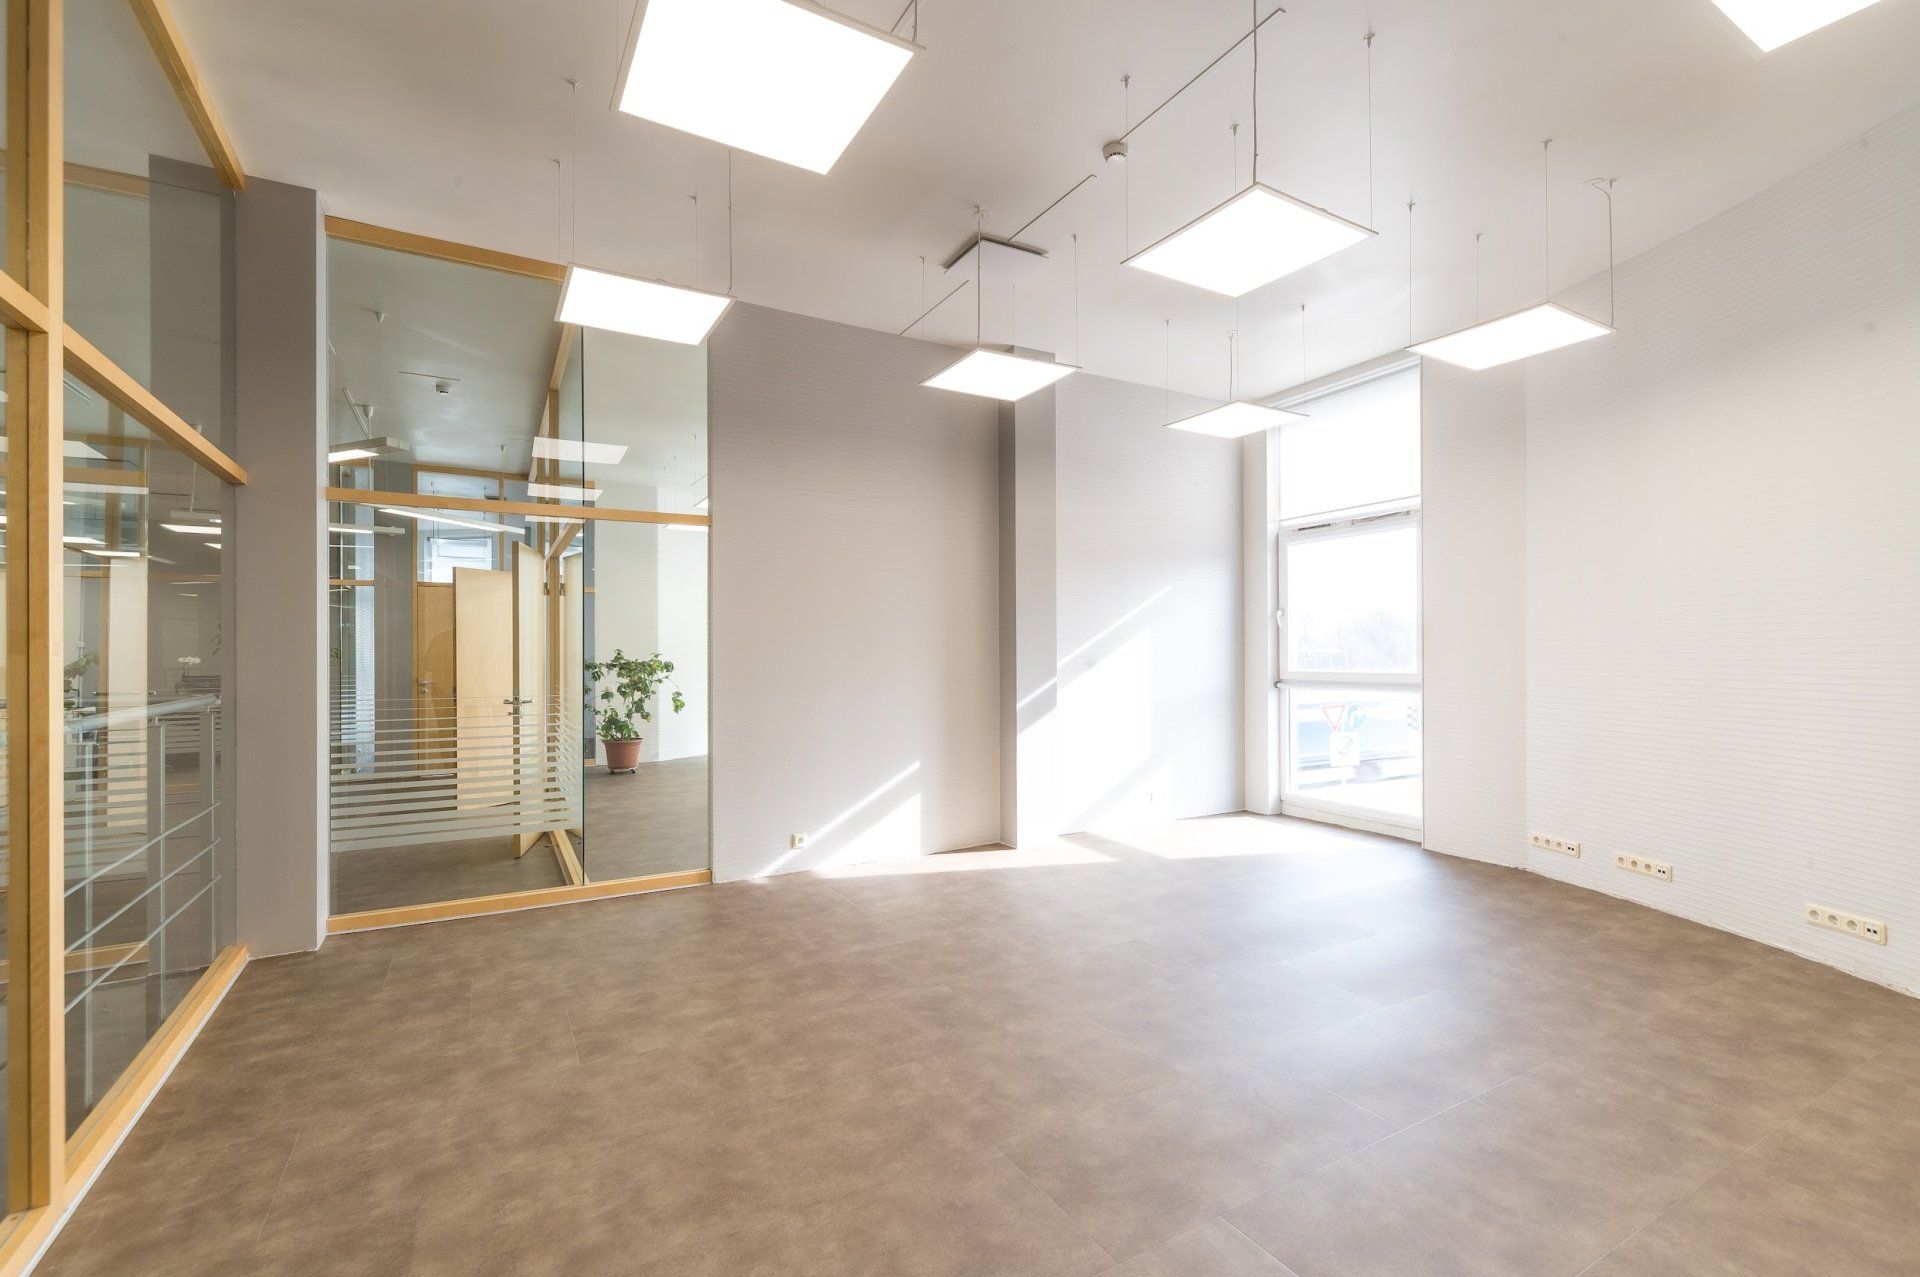 Office for rent with an area of 31.90 m2 in the office center Neretas Biroji, Neretas iela 2k1-107, Riga